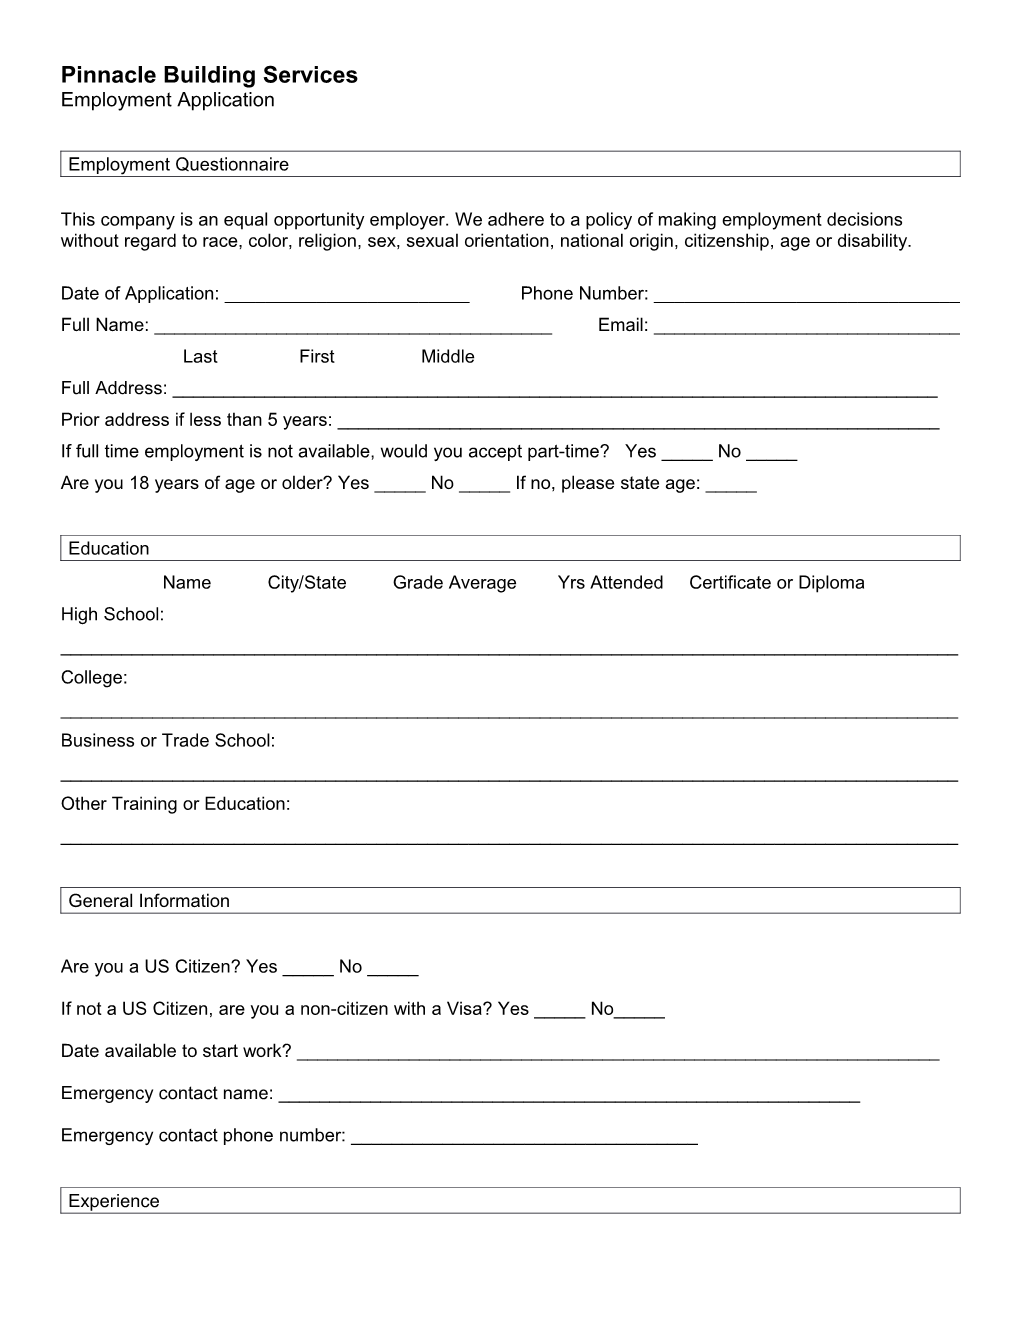 Pinnacle Building Services Employment Application